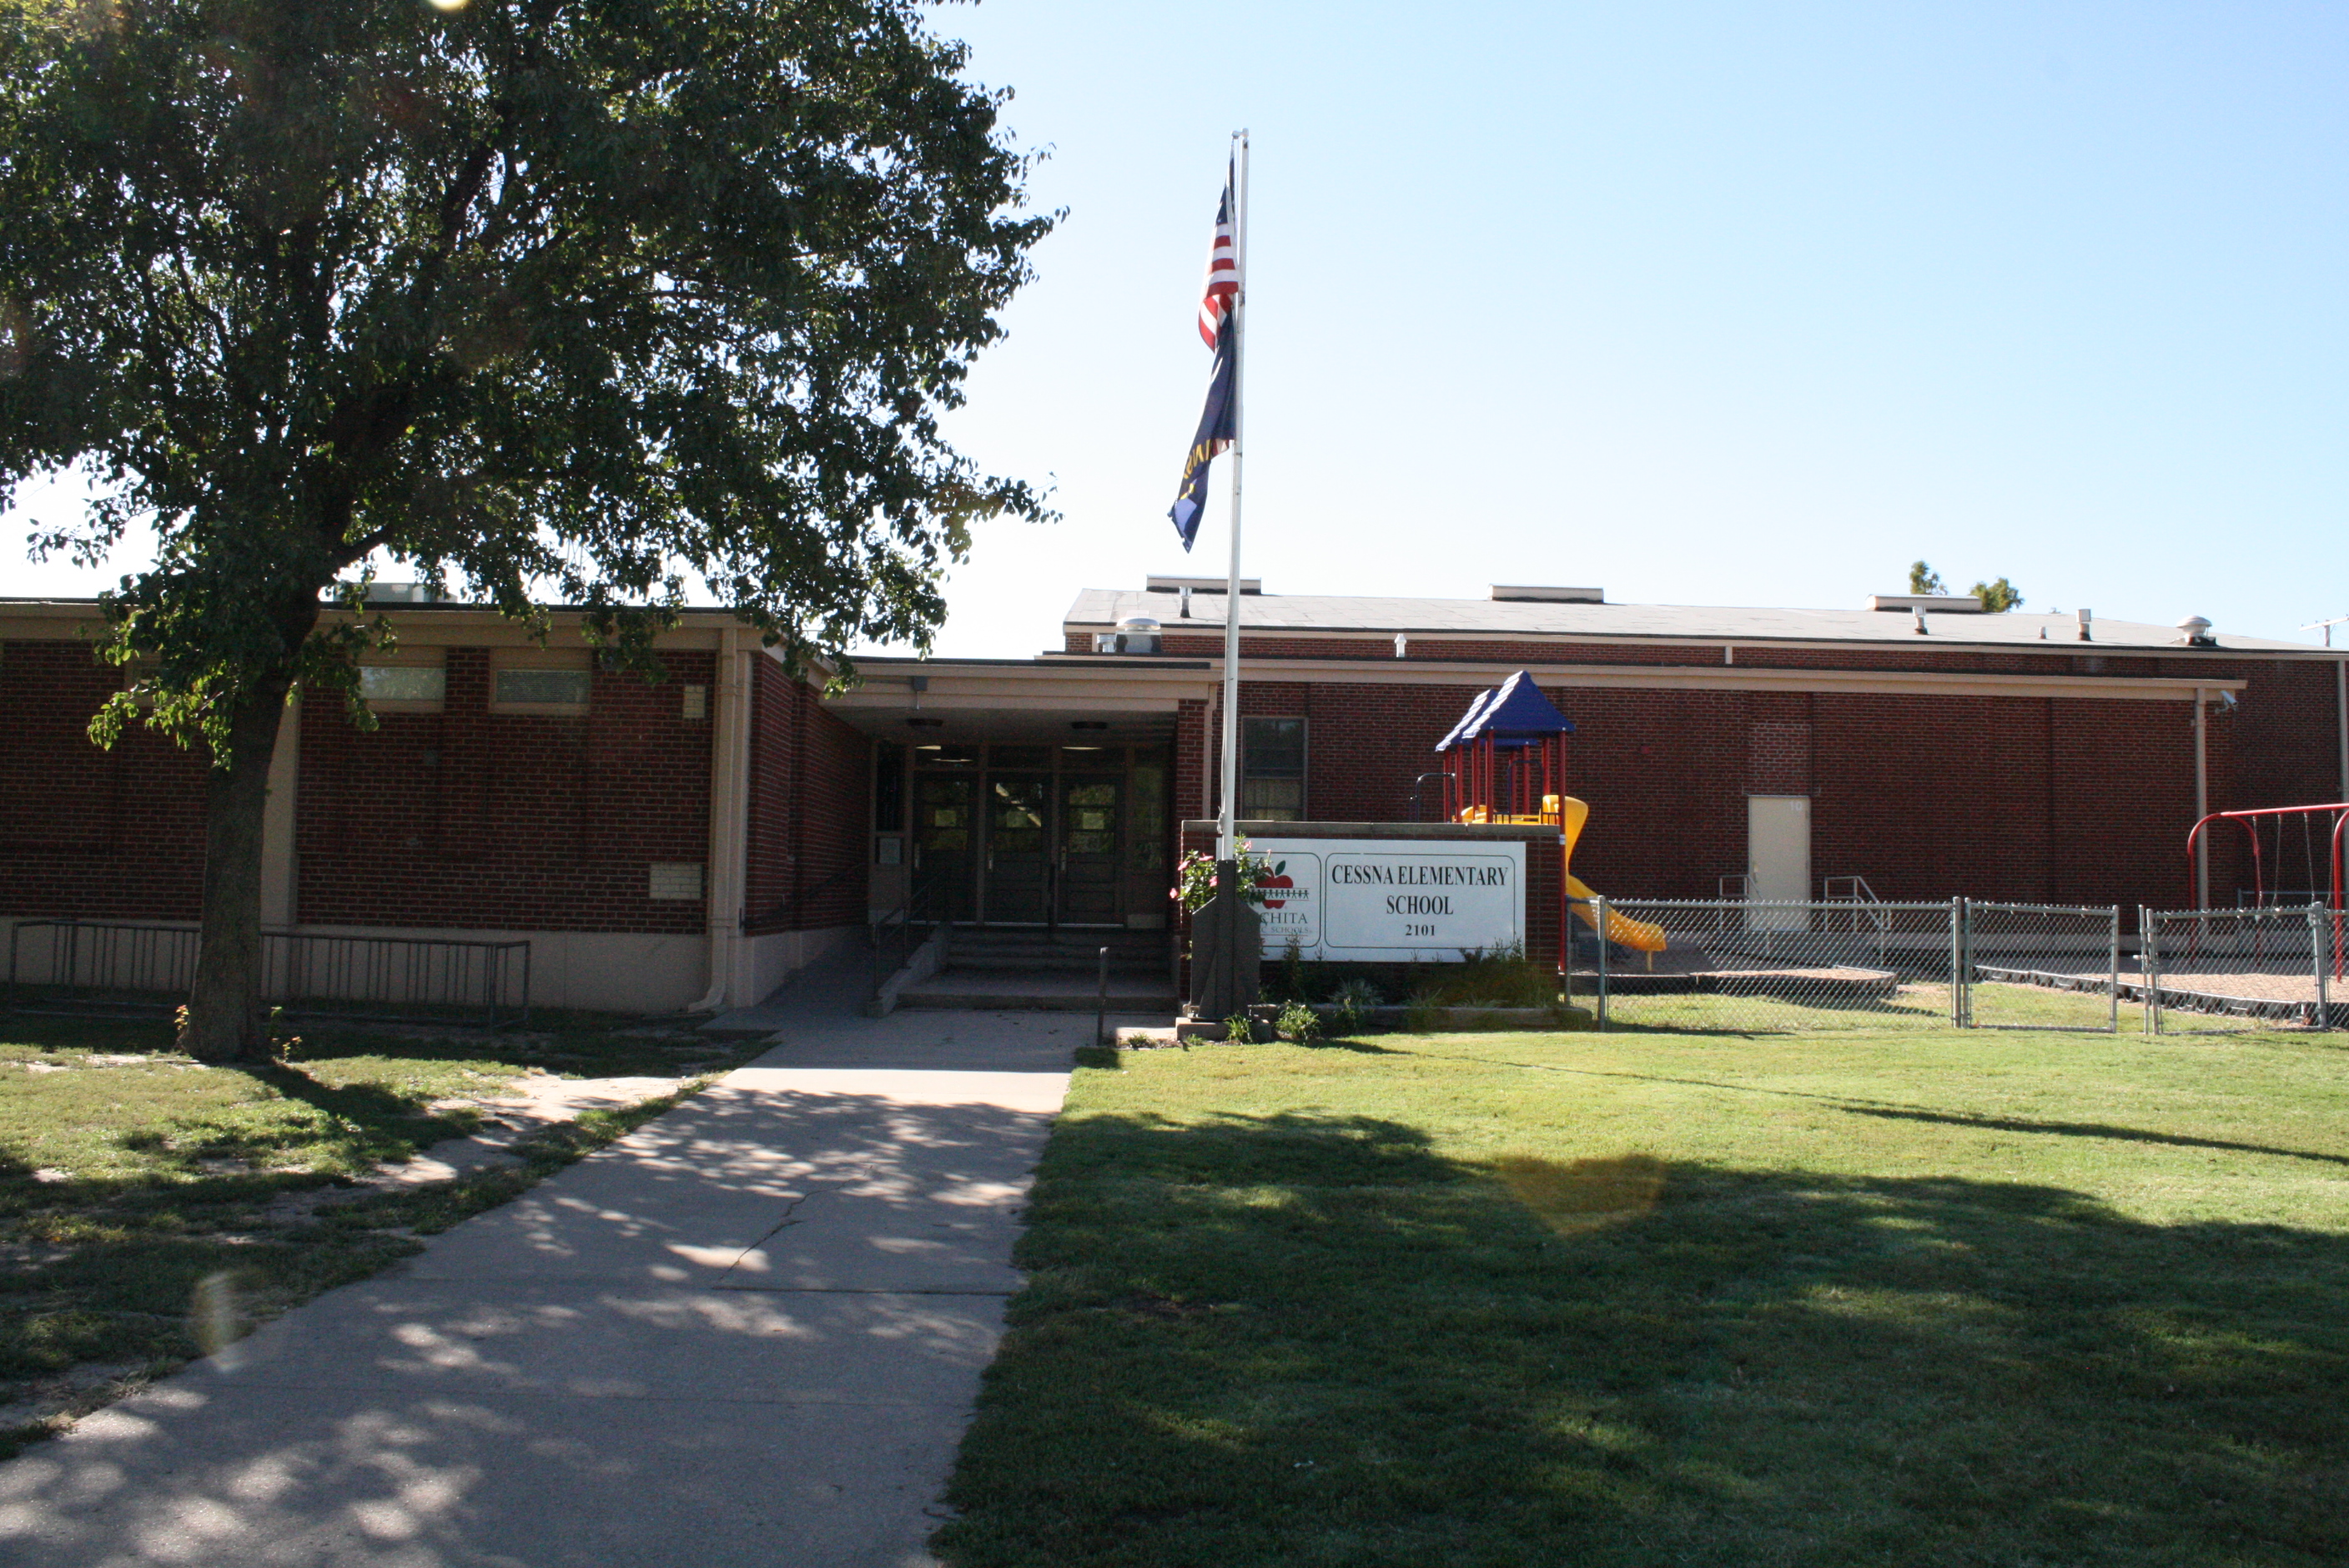 Image of the front of Cessna Elementary School